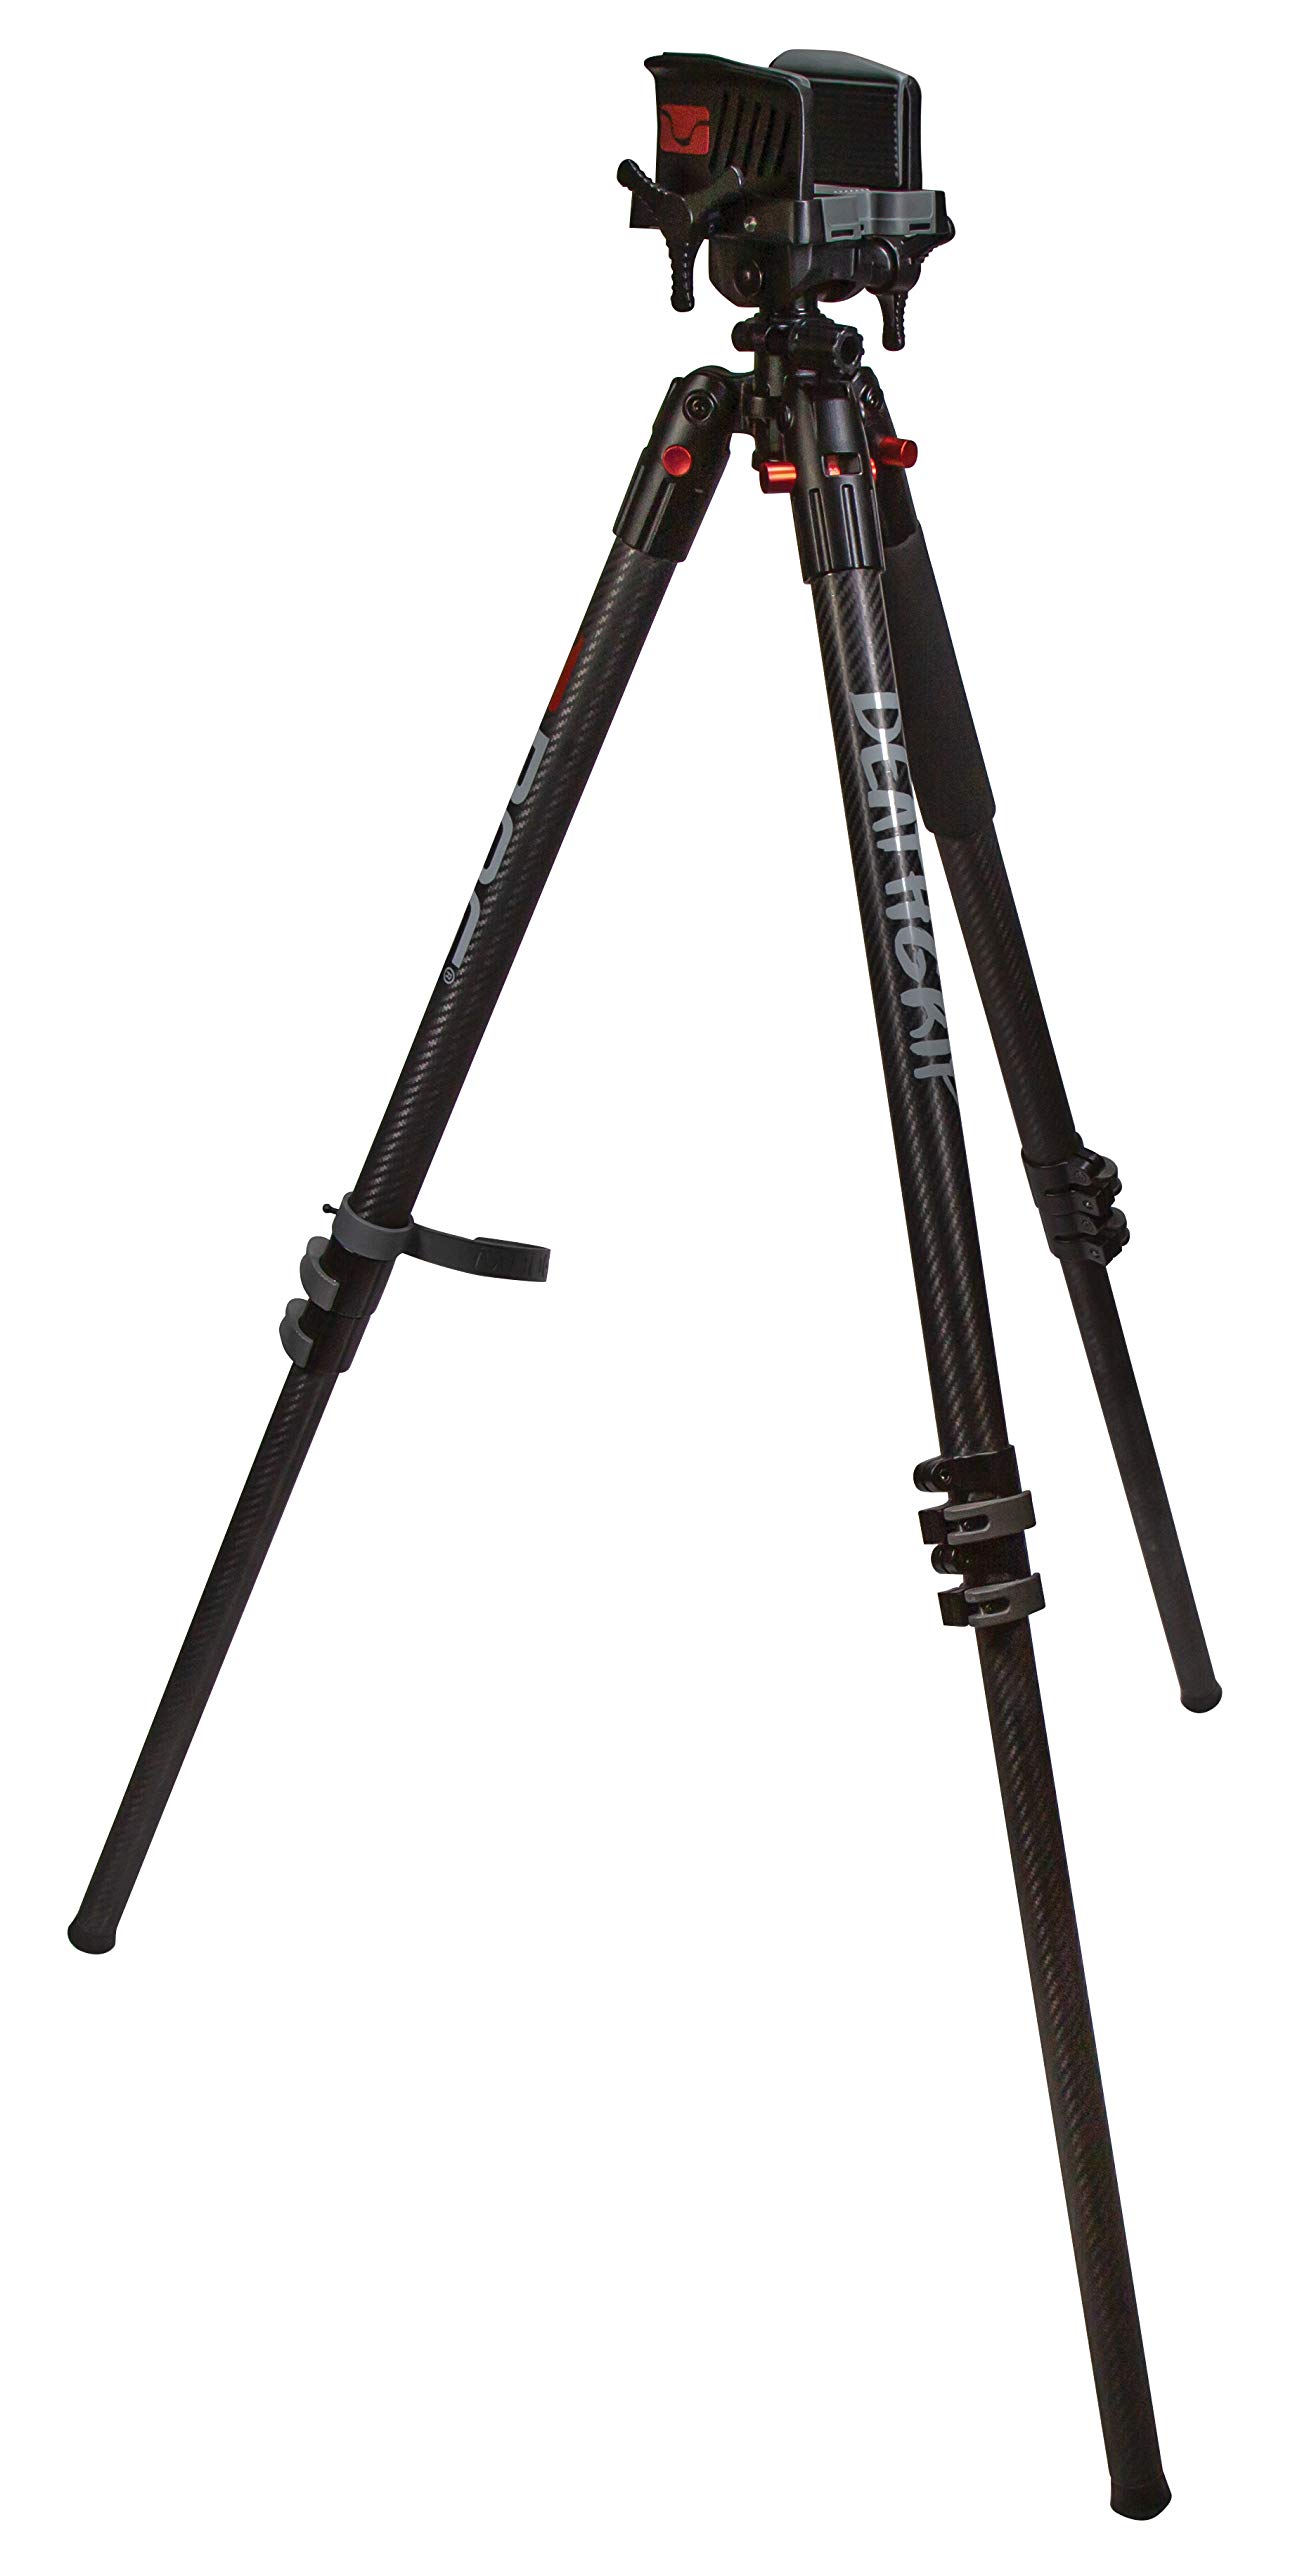 BOG DeathGrip Carbon Fiber Tripod with Durable Frame, Lightweight, Stable Design, Bubble Level, Adjustable Legs, Shooting Rest, and Hands-Free Operation for Hunting, Shooting, and Outdoors